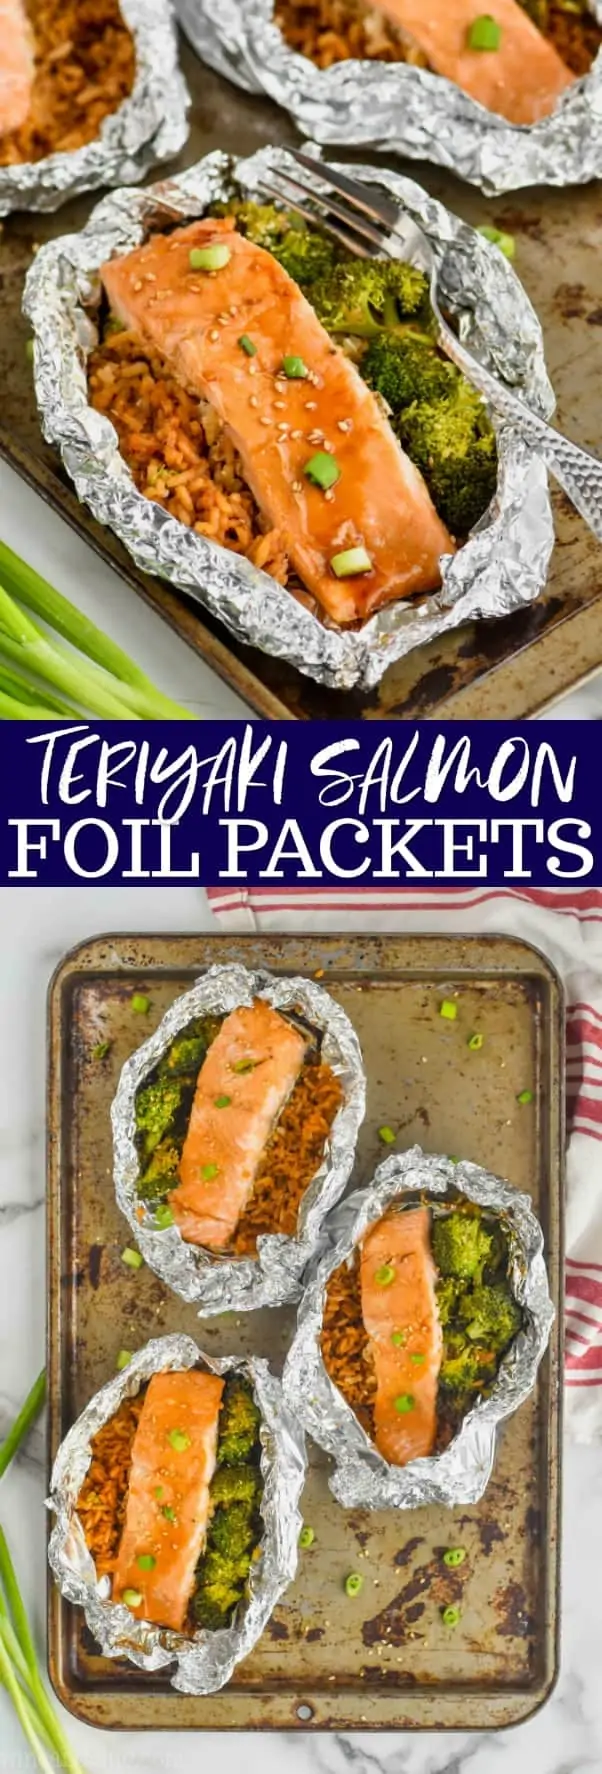 collage of teriyaki salmon foil packets recipe picture